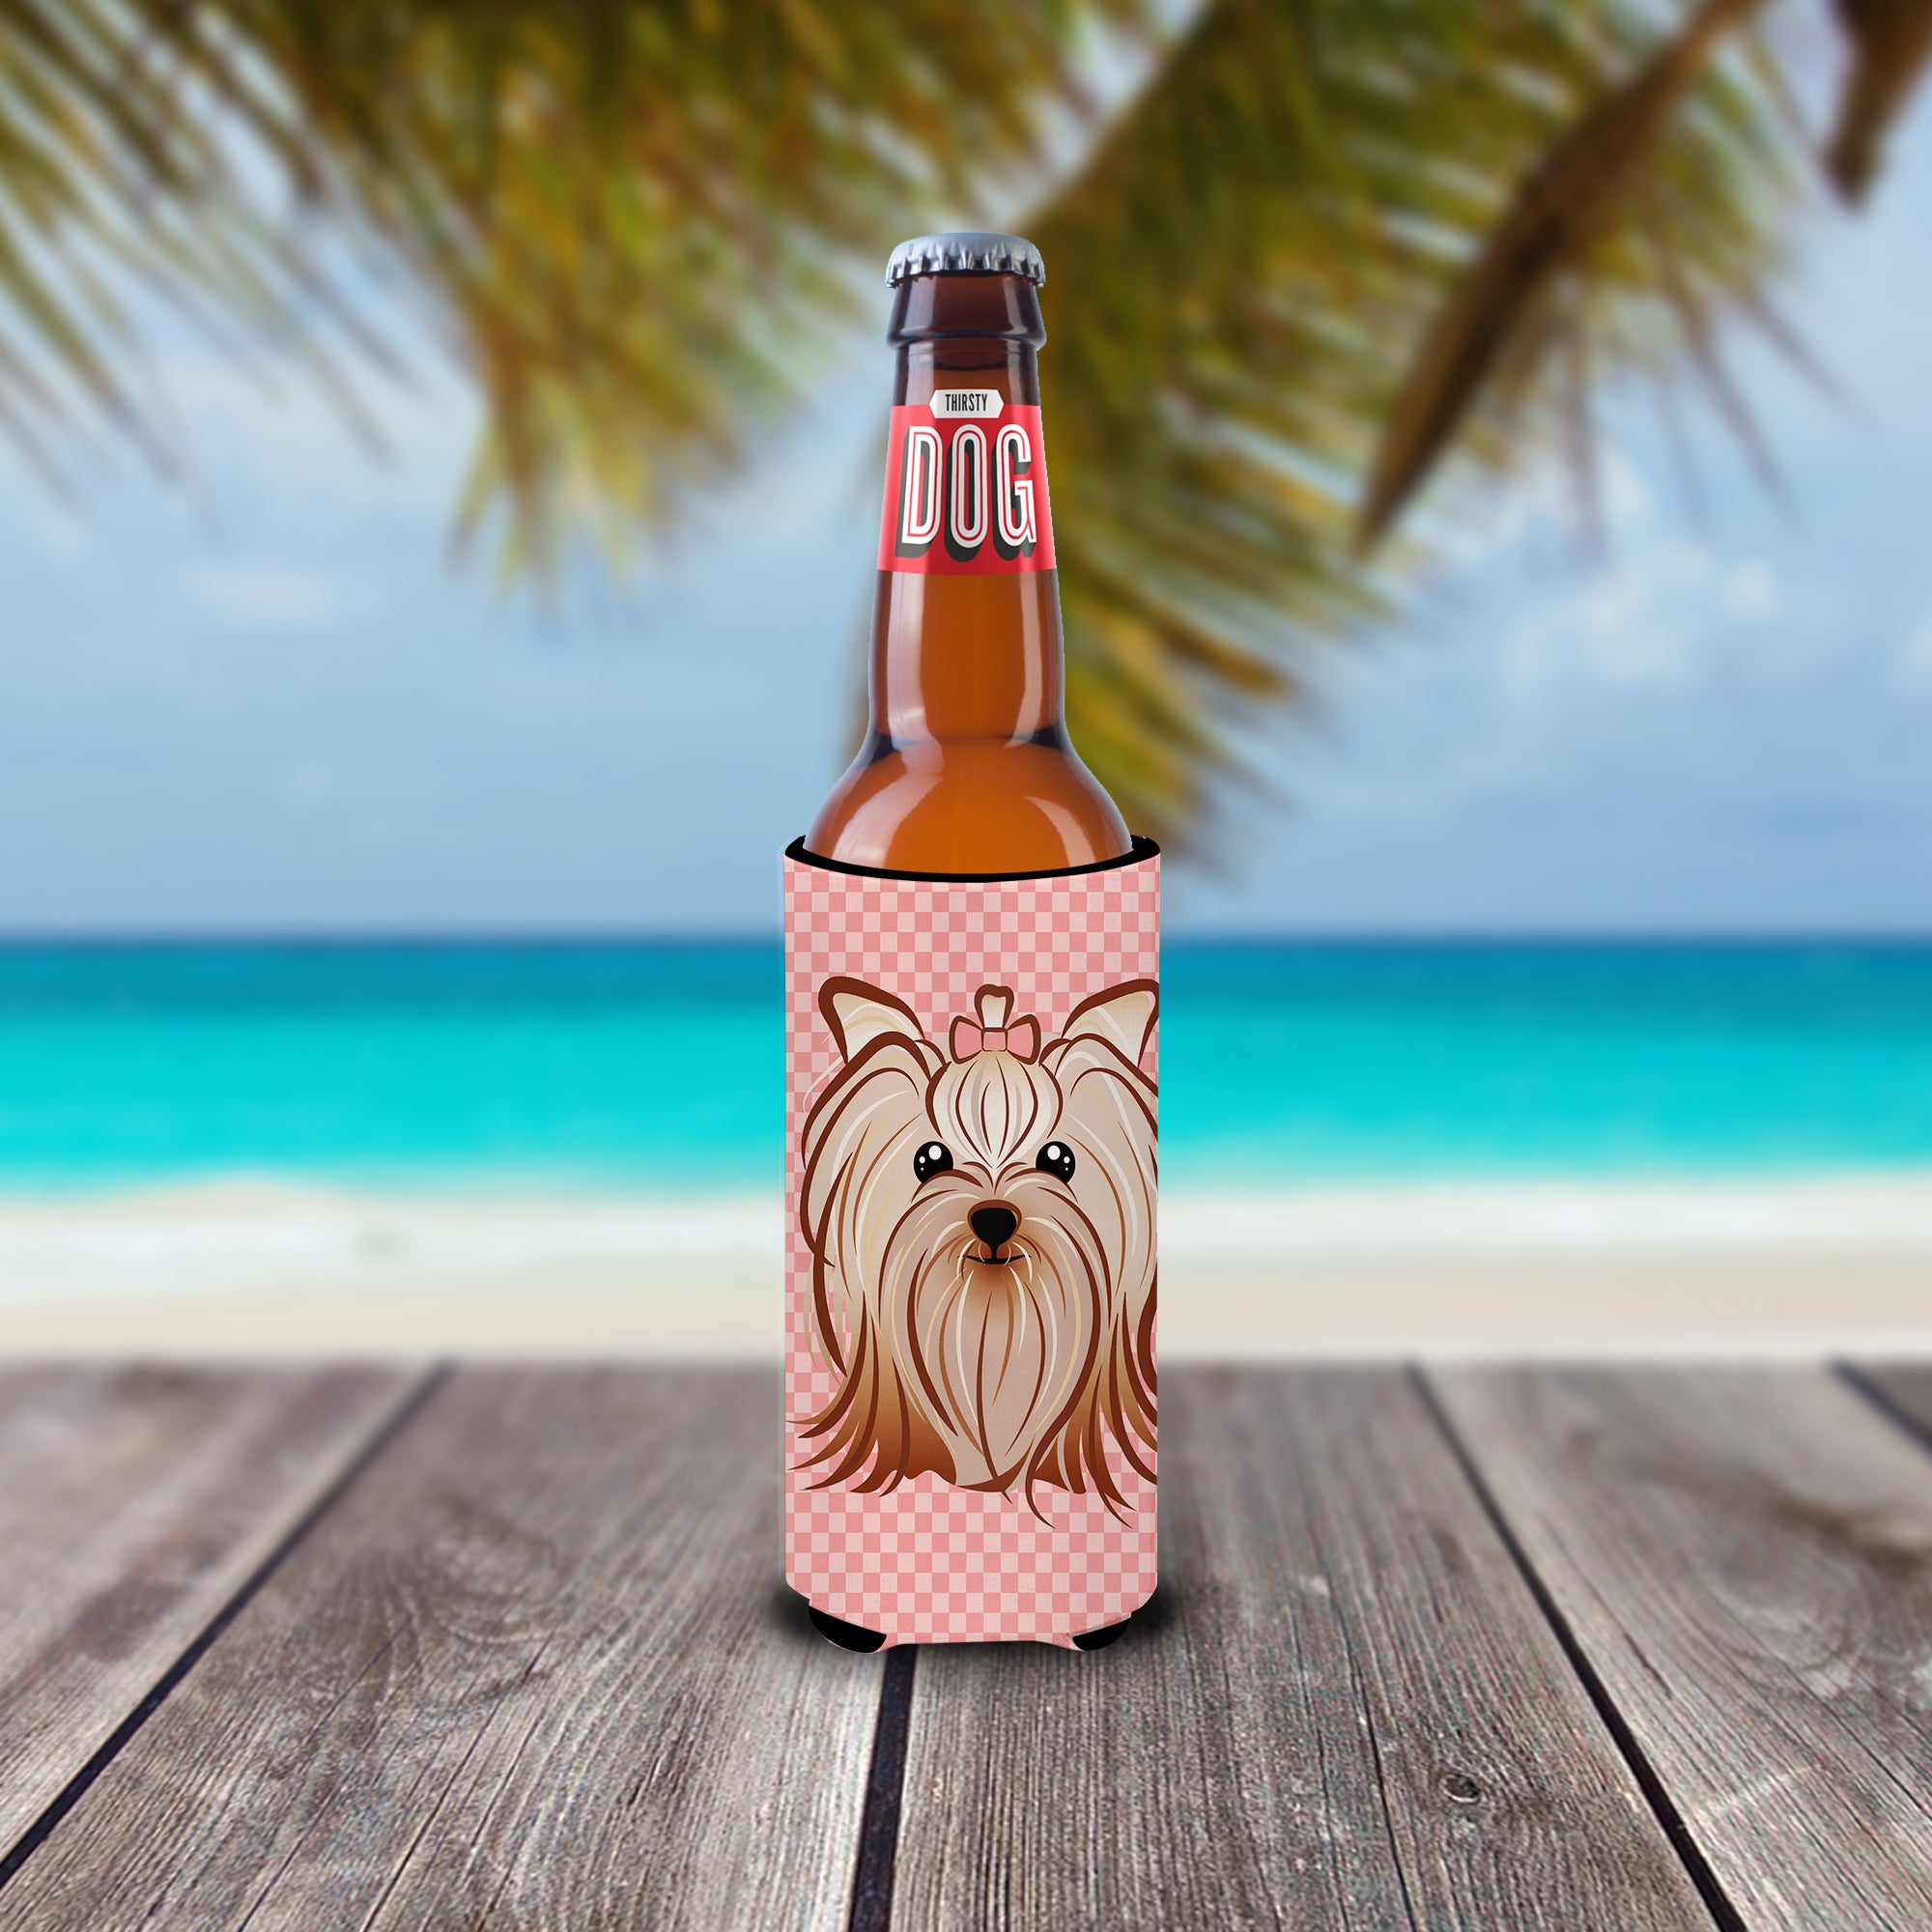 Pink Checkered Yorkie / Yorkshire Terrier Ultra Beverage Insulators for slim cans BB1138MUK